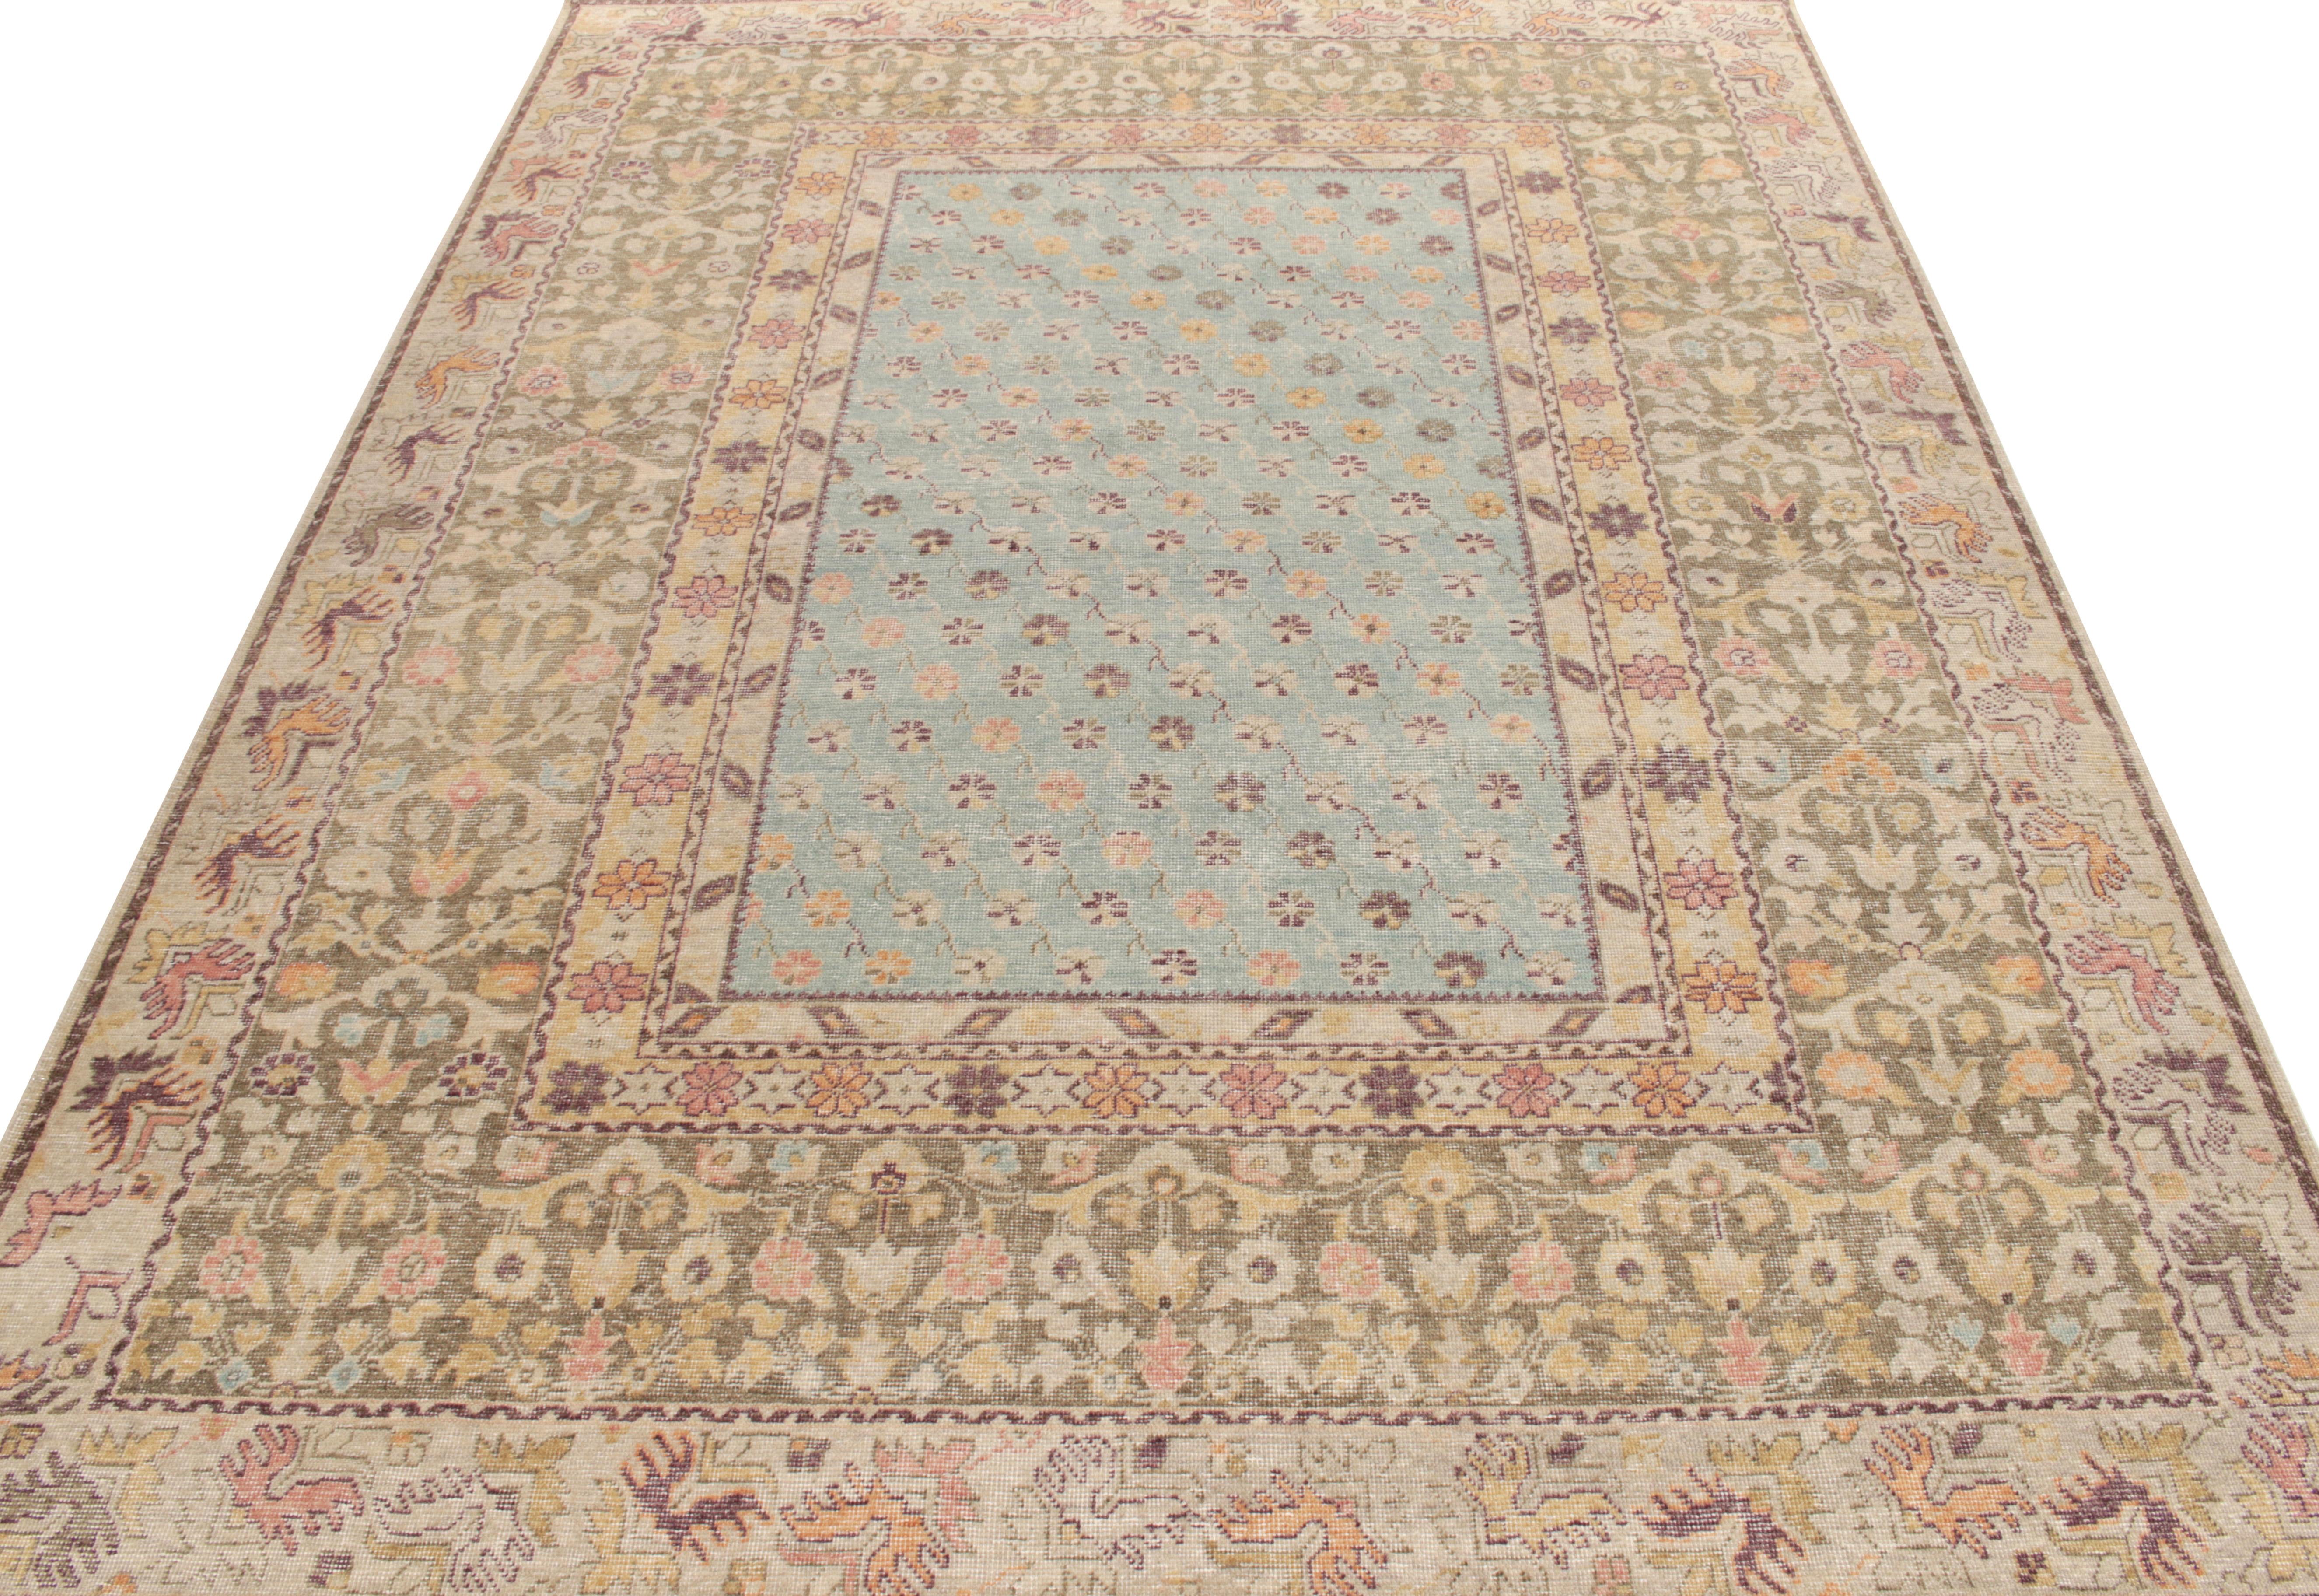 A 9x12 distressed style rug from Rug & Kilim’s Homage collection inspired by mid-century European style in muted tones of aubergine, silver gray, cream, sky blue & gold transitioning joyfully into a floral pattern relishing classic aesthetics for